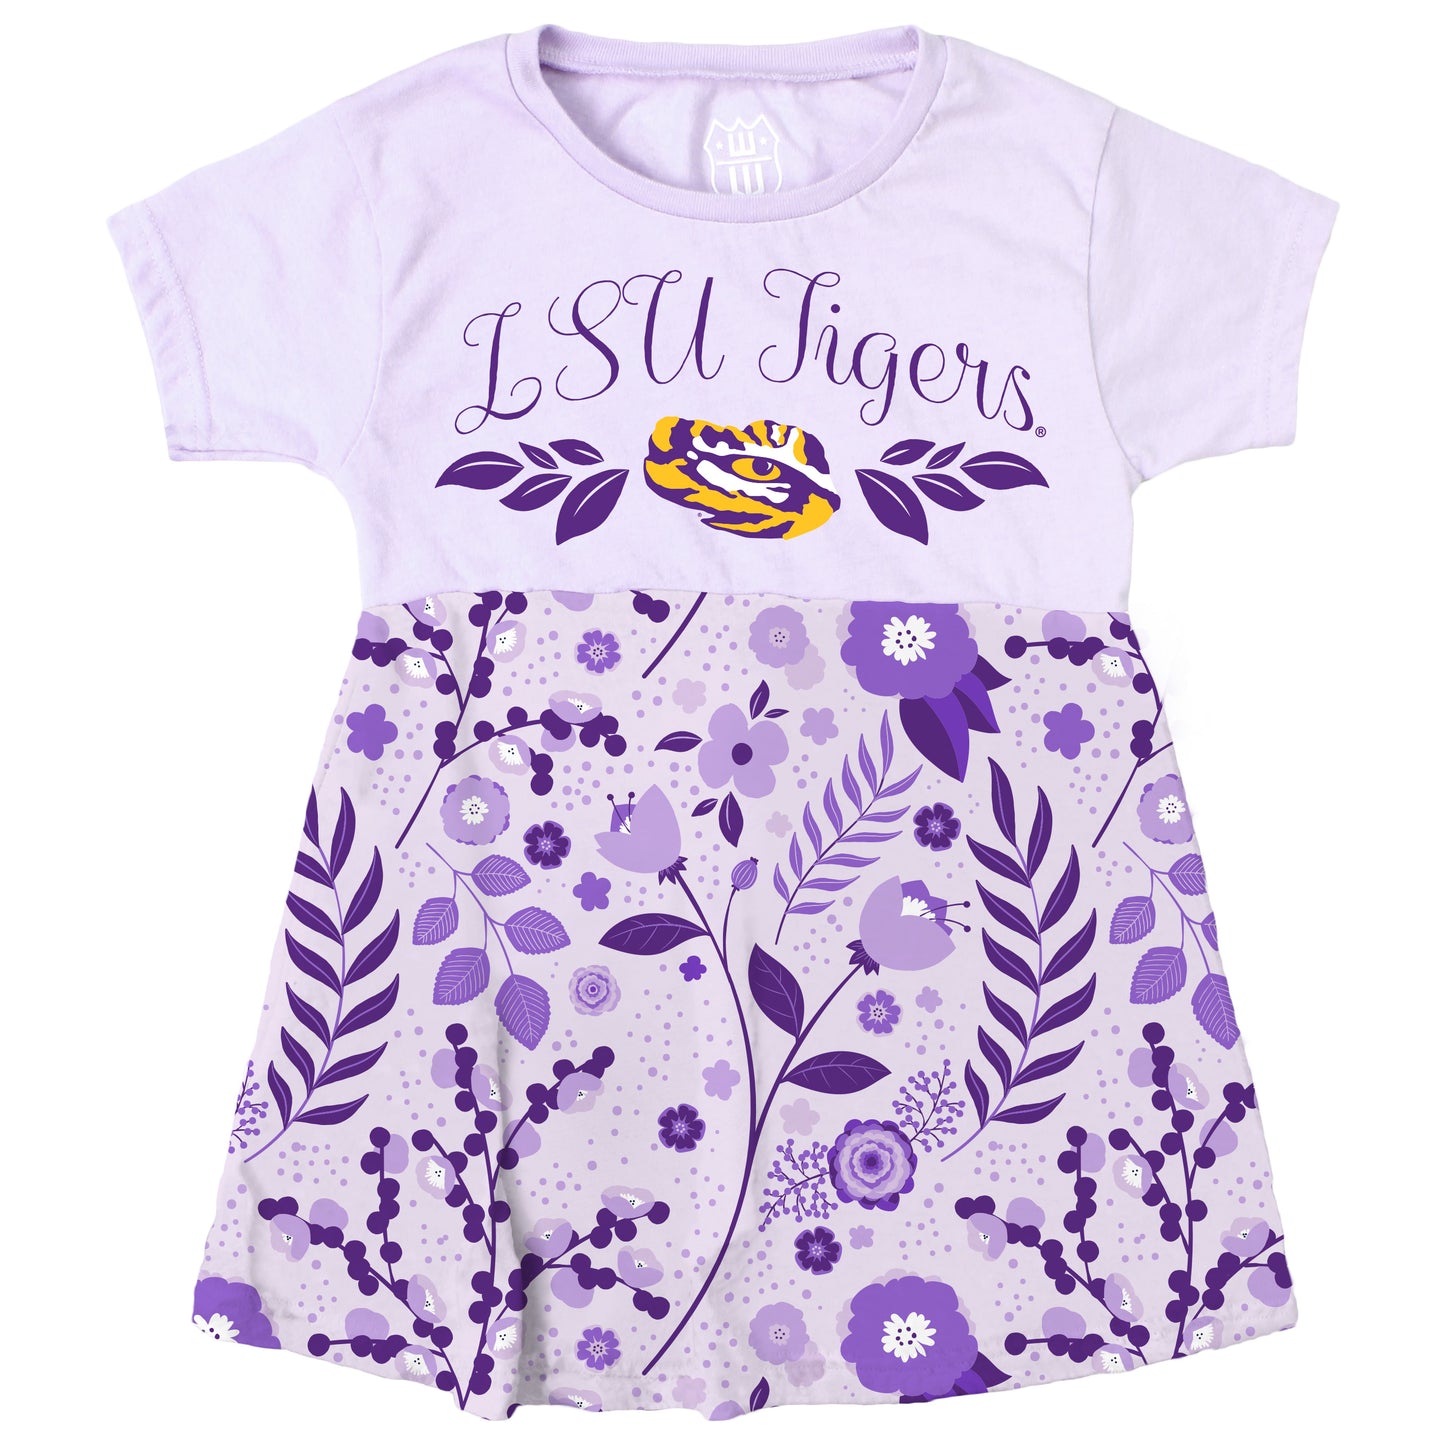 Wes & Willy LSU Tigers Infant's Floral Dress